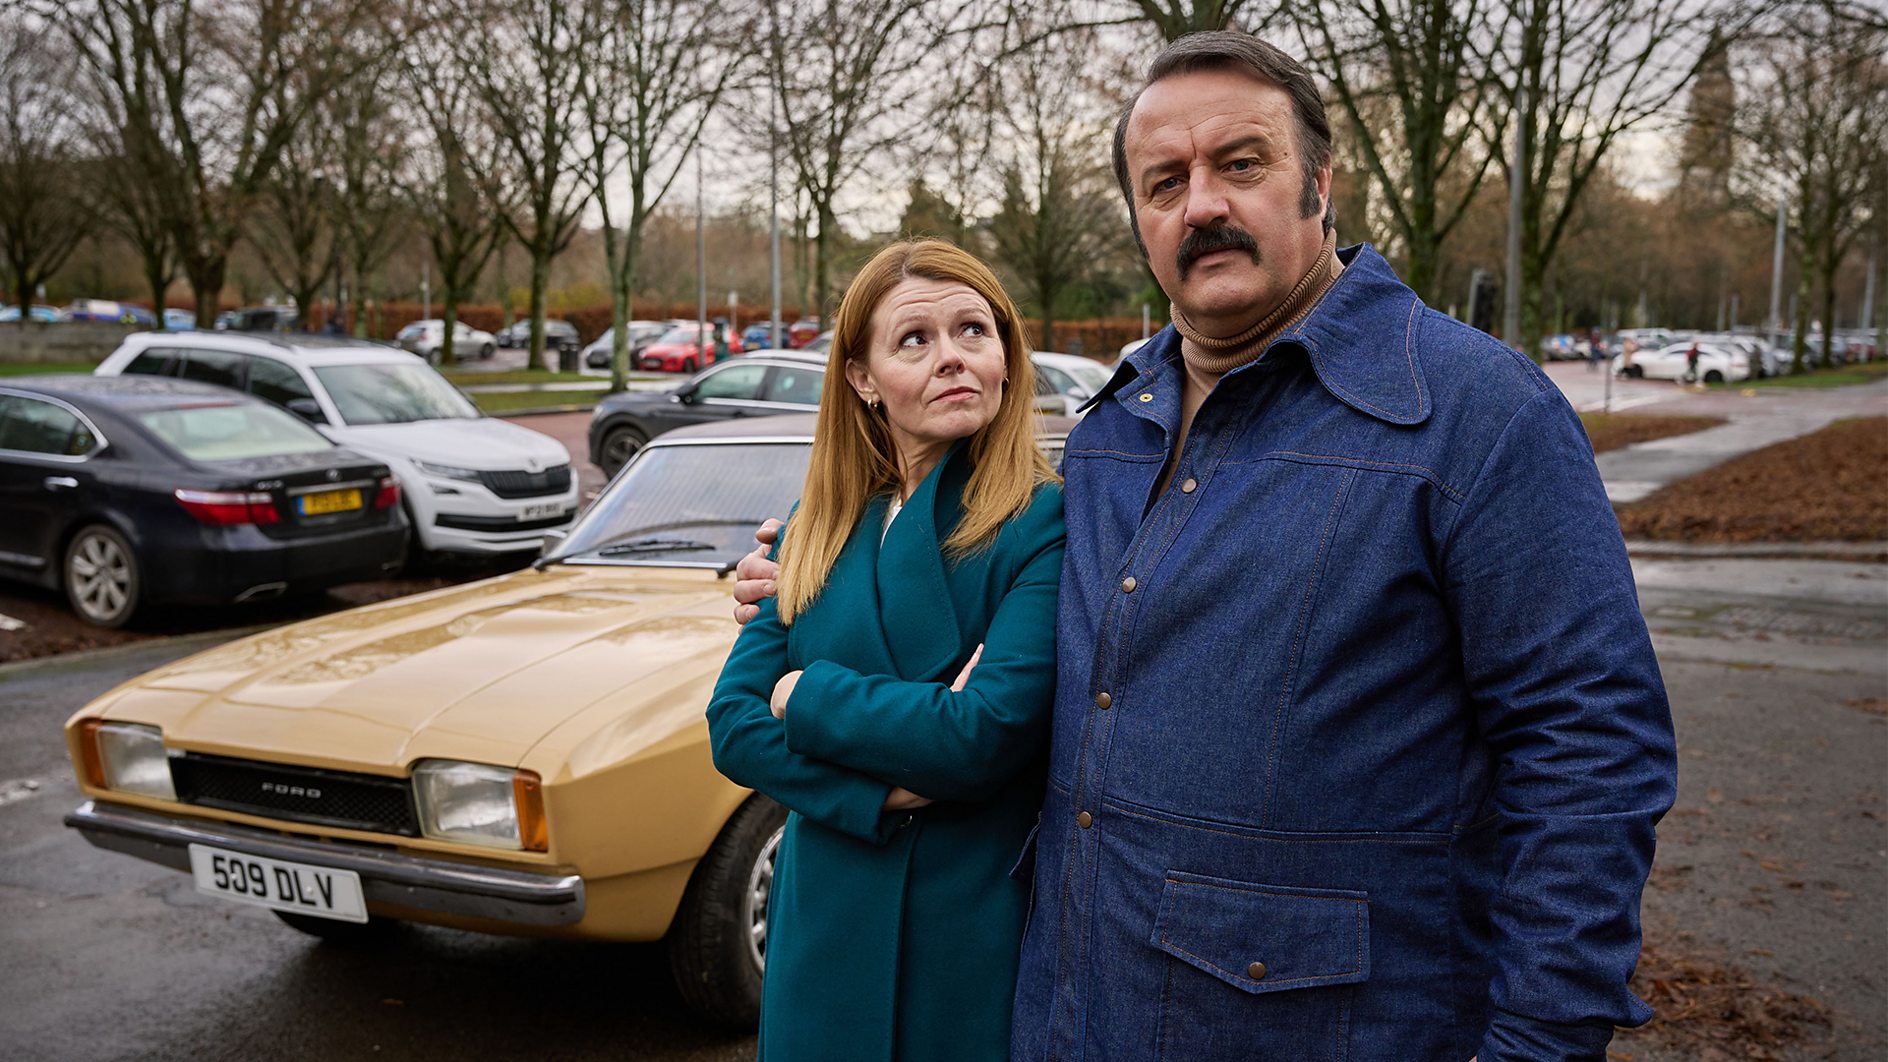 Interview with Sian Gibson who plays Mel in BBC Two's Mammoth - from April 17